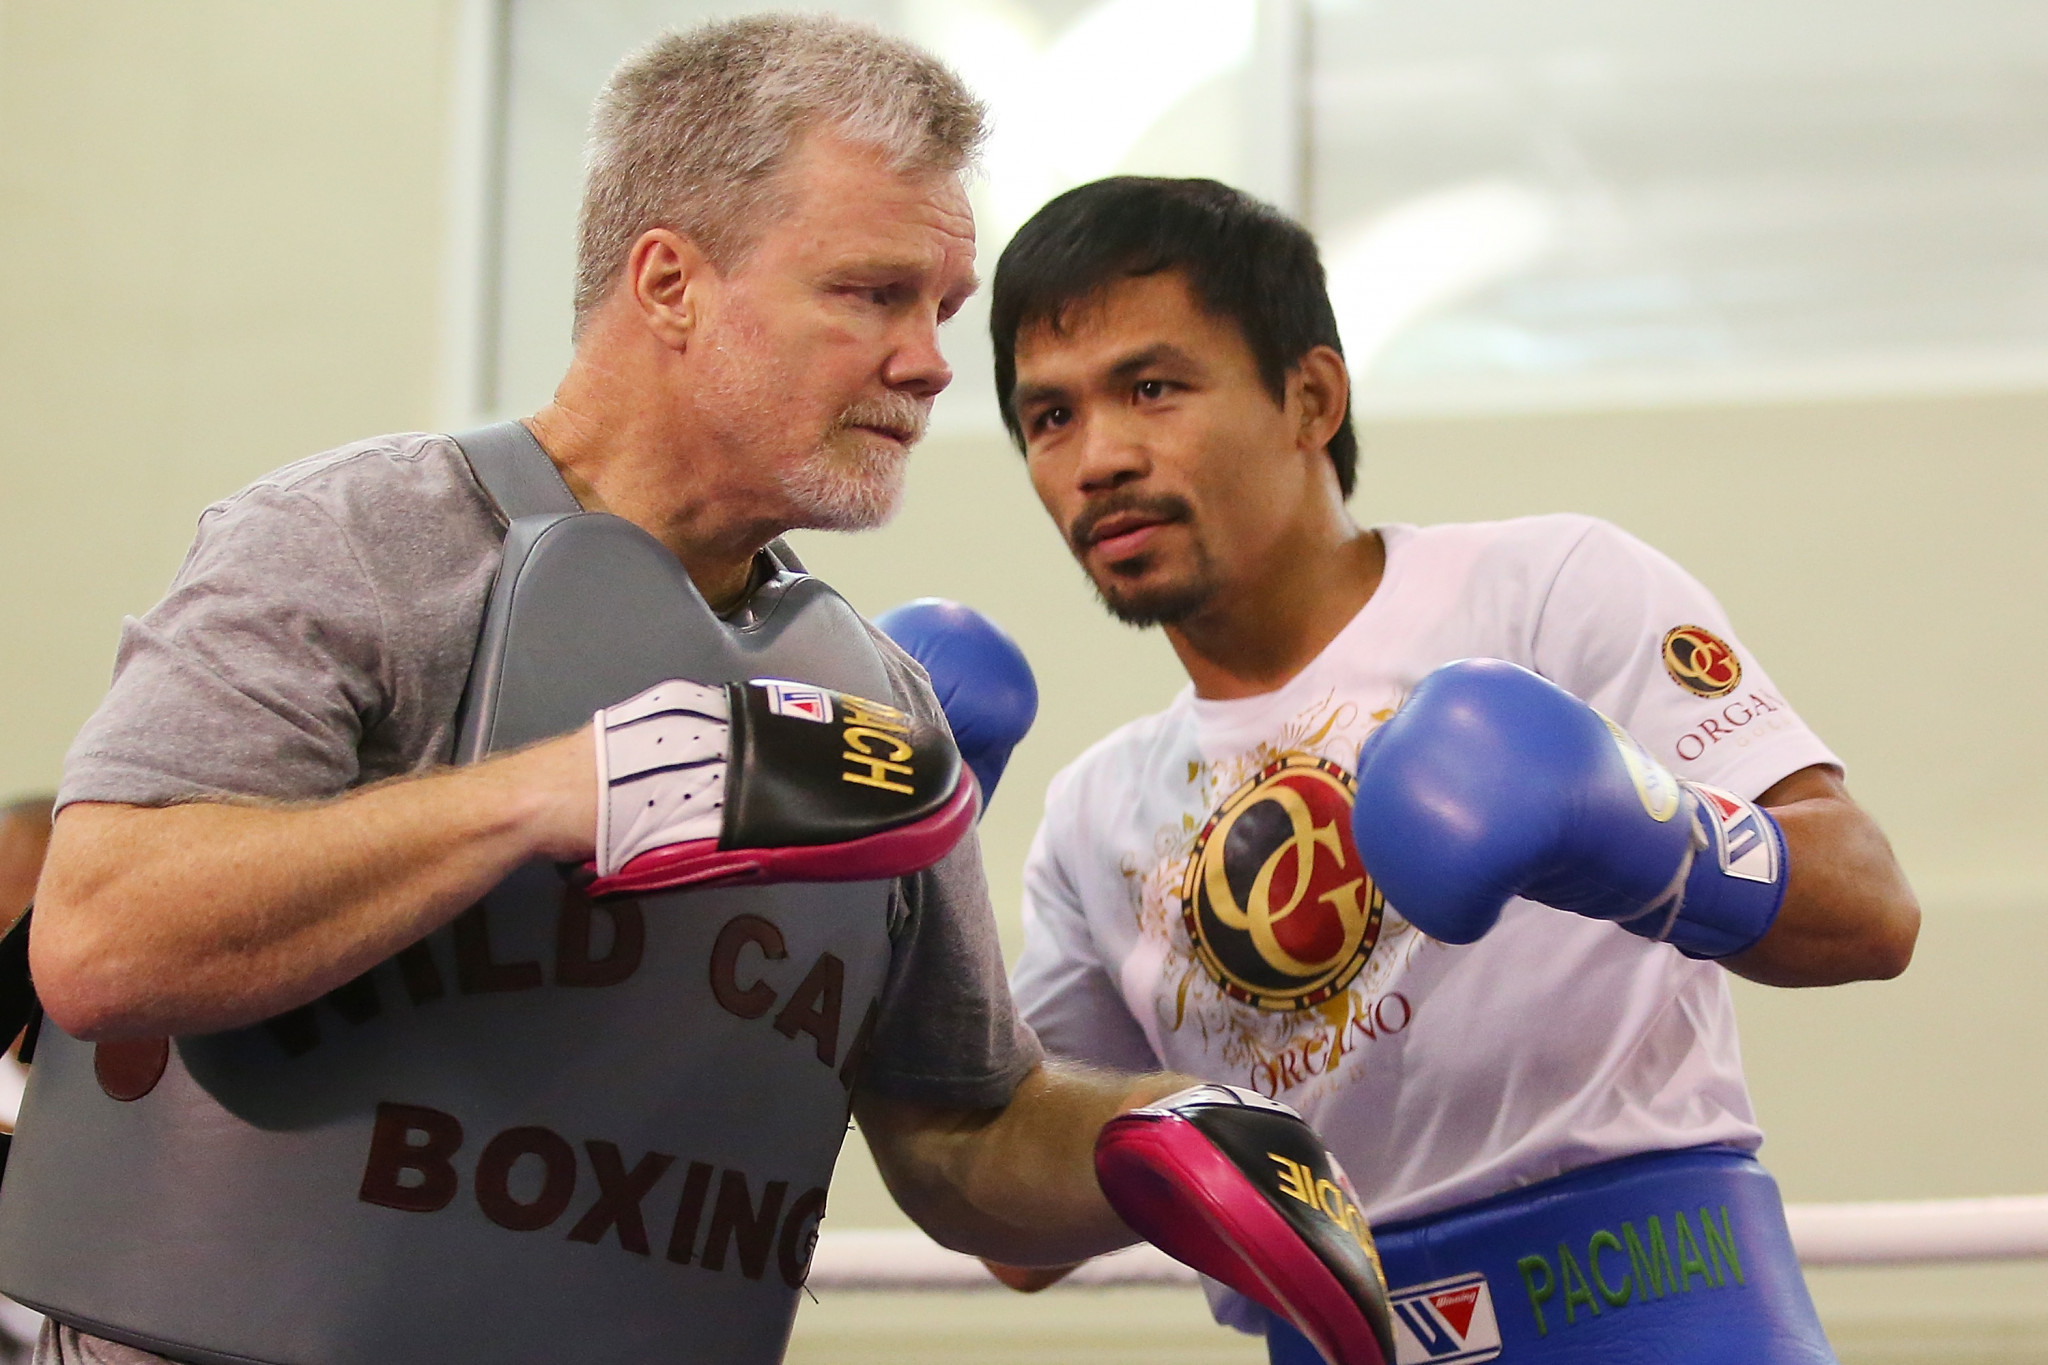 Freddie Roach, pictured with his boxer Manny Pacquiao, was at the gym in Los Angeles when the Scottish team visited ©Getty Images